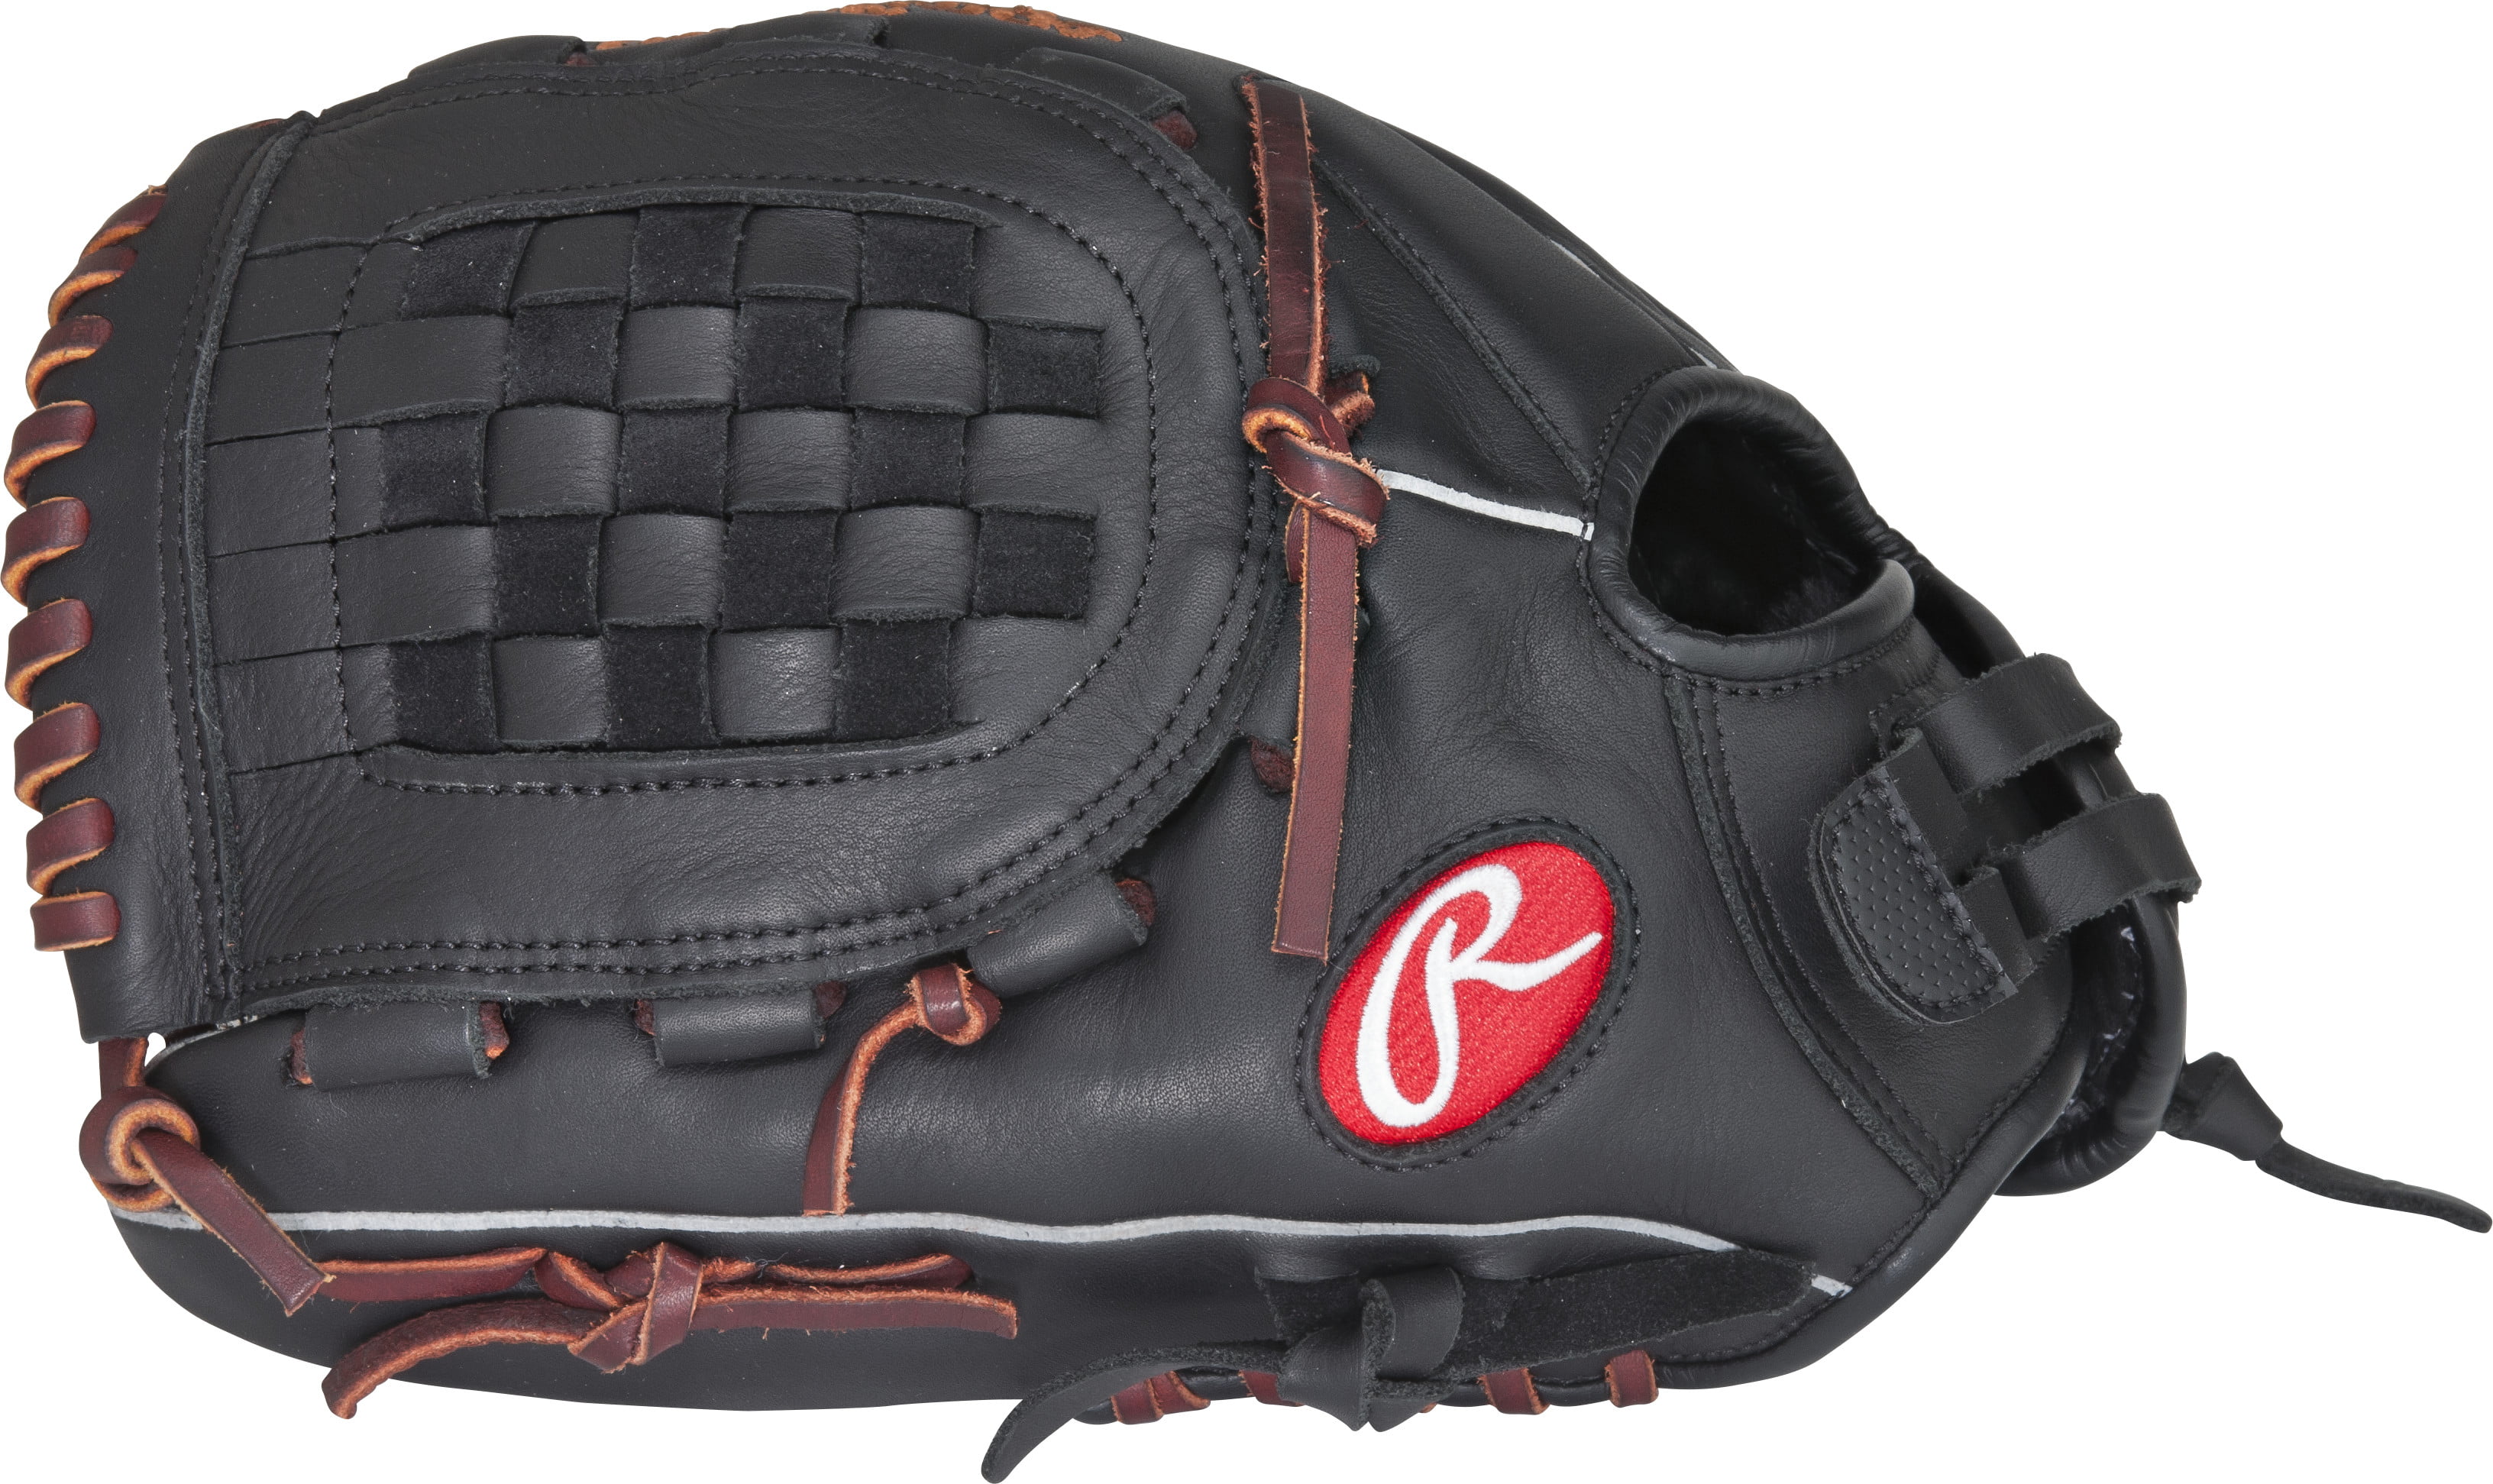 Rawlings FP110 11" FastPitch Softball Glove Brown w/Pink Highlights 3D Web NEW 